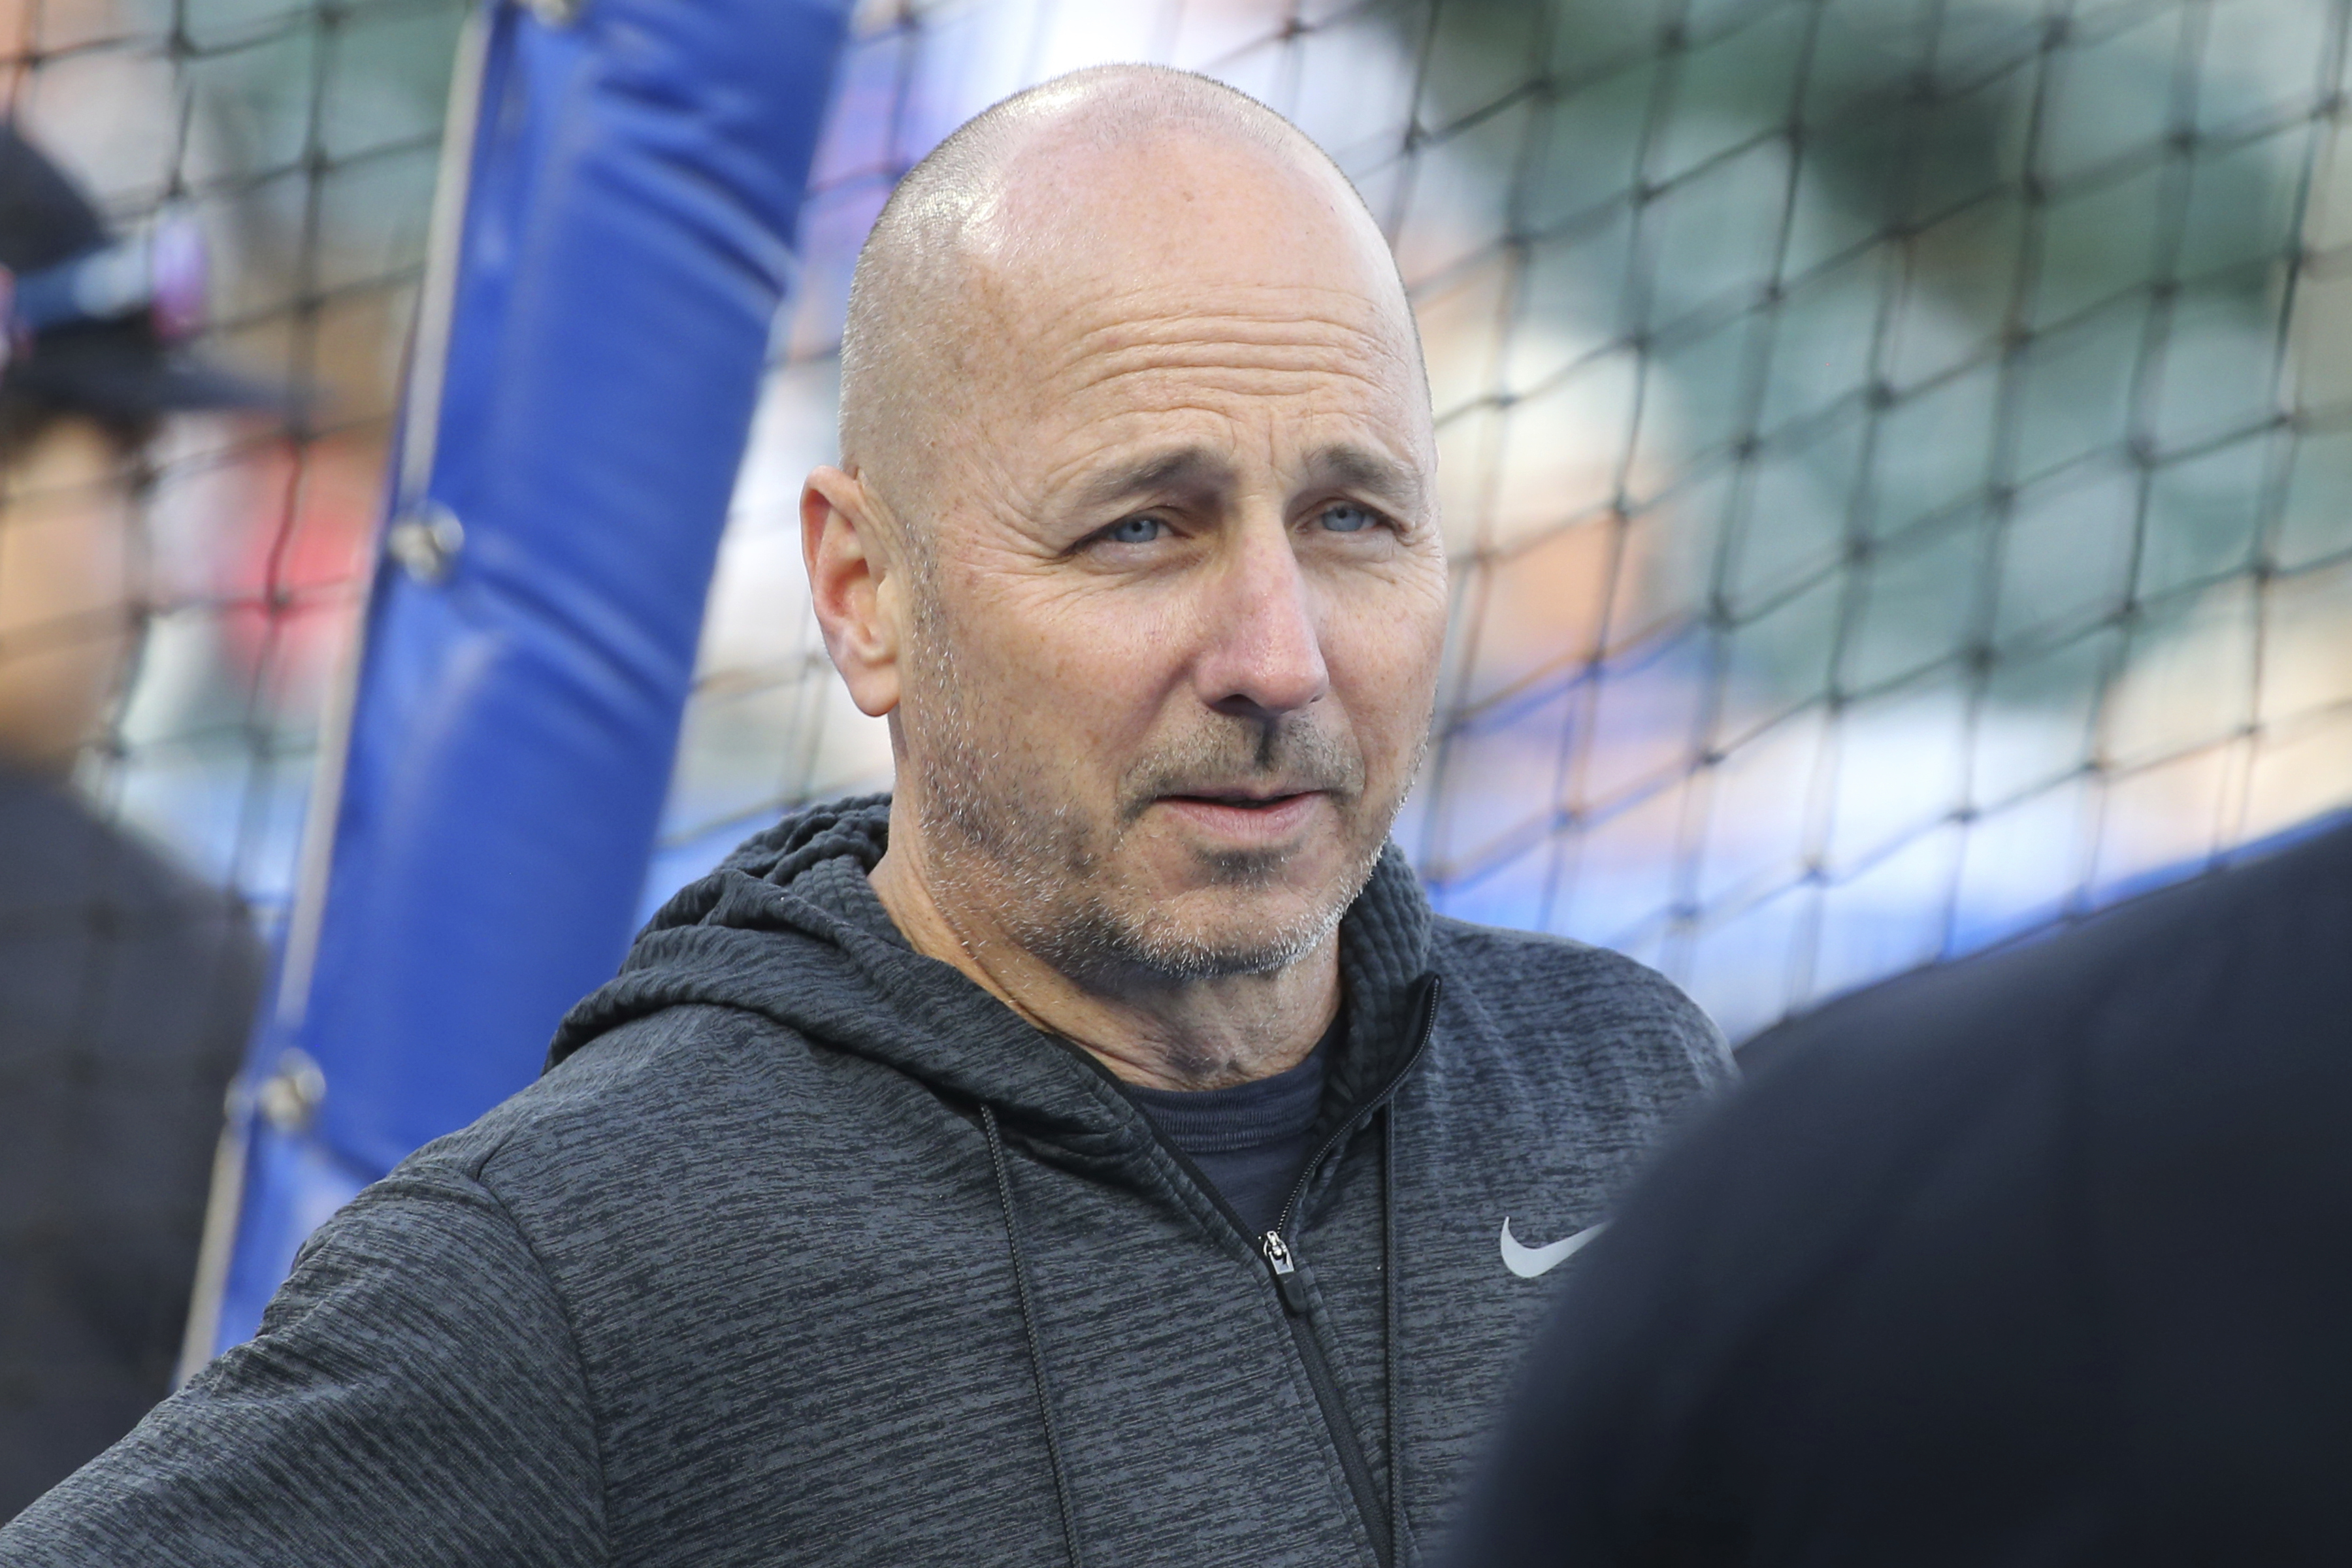 Yankees GM Brian Cashman on Team's Struggles This Season: 'We Suck Right Now'